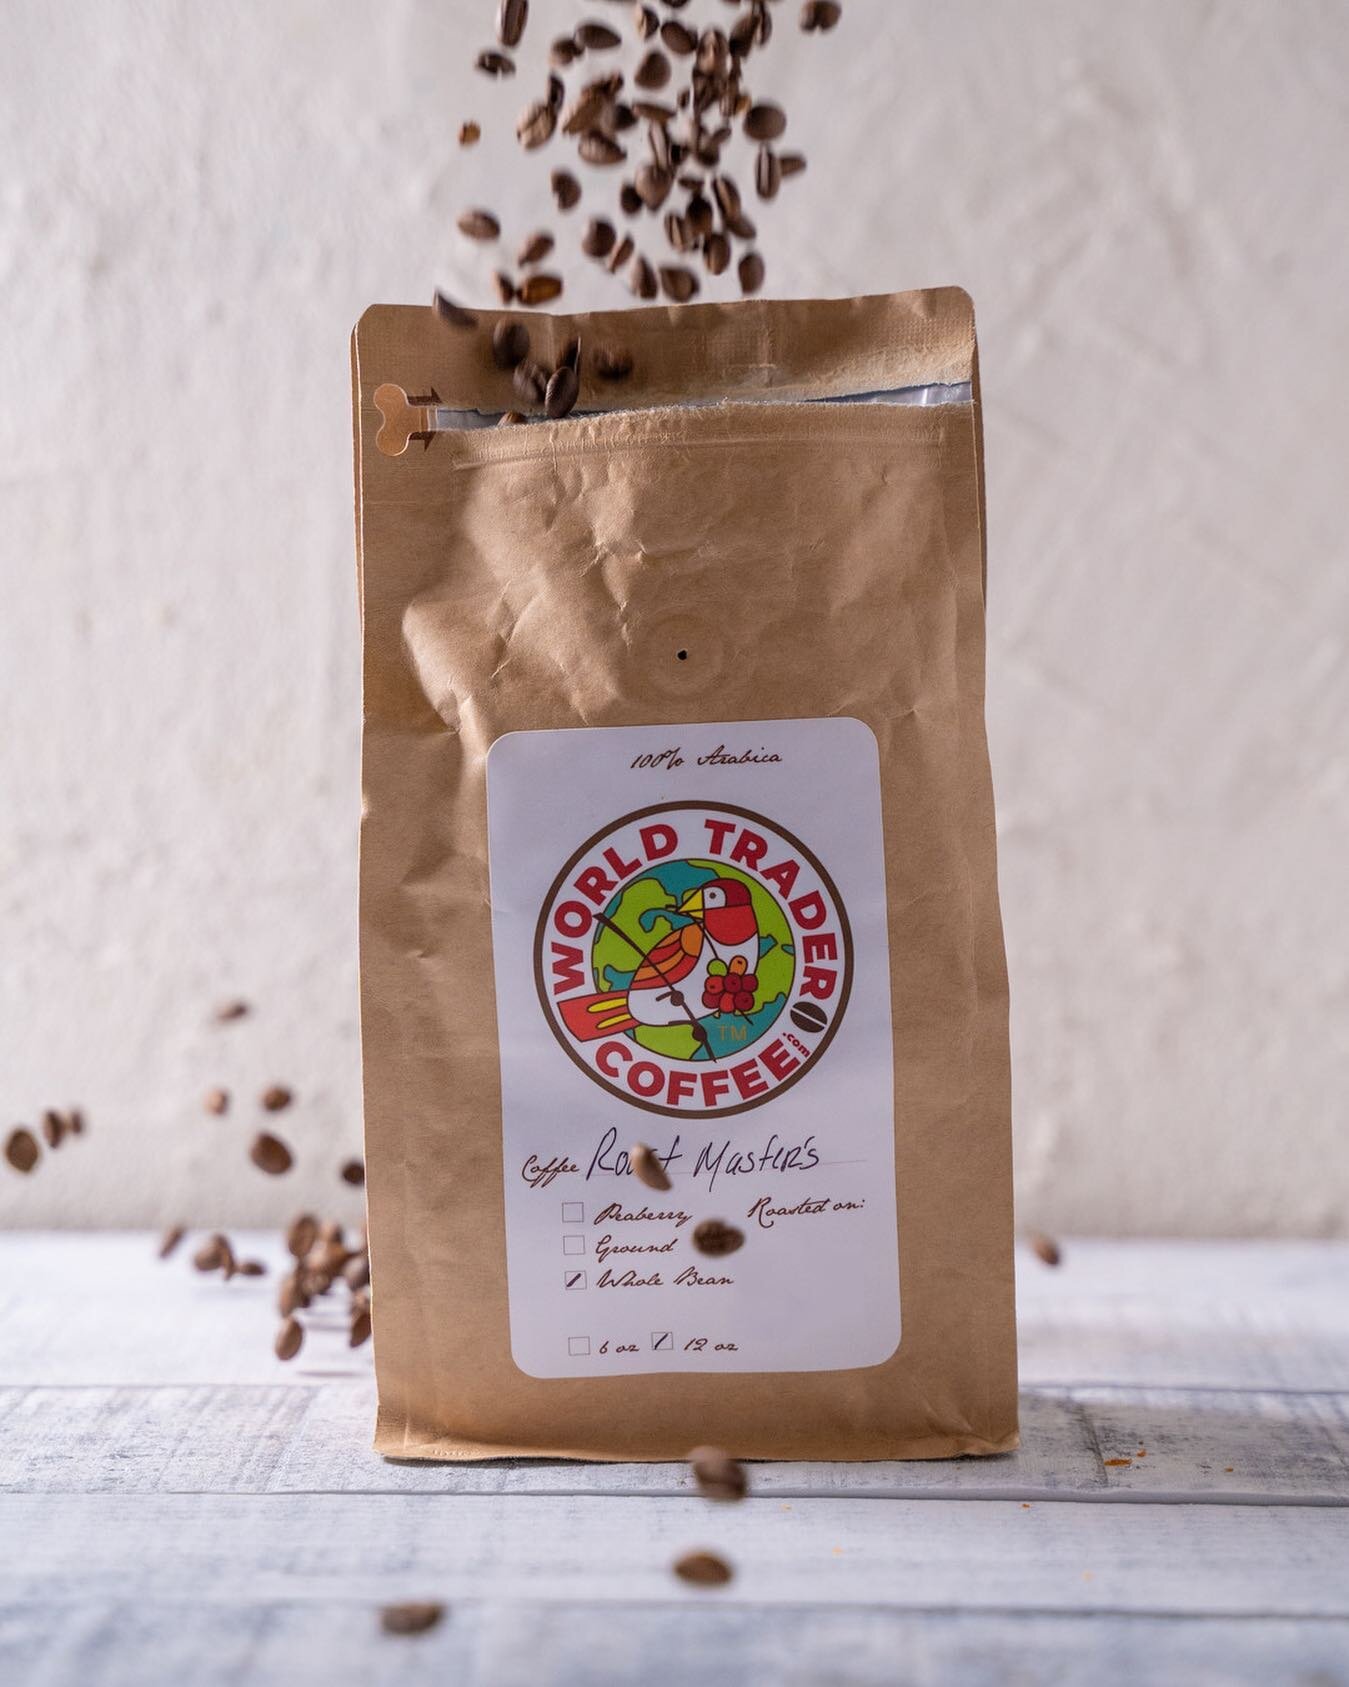 #fresh #smallbatch #roasted #coffee It&rsquo;s an explosion of flavor in every bag.